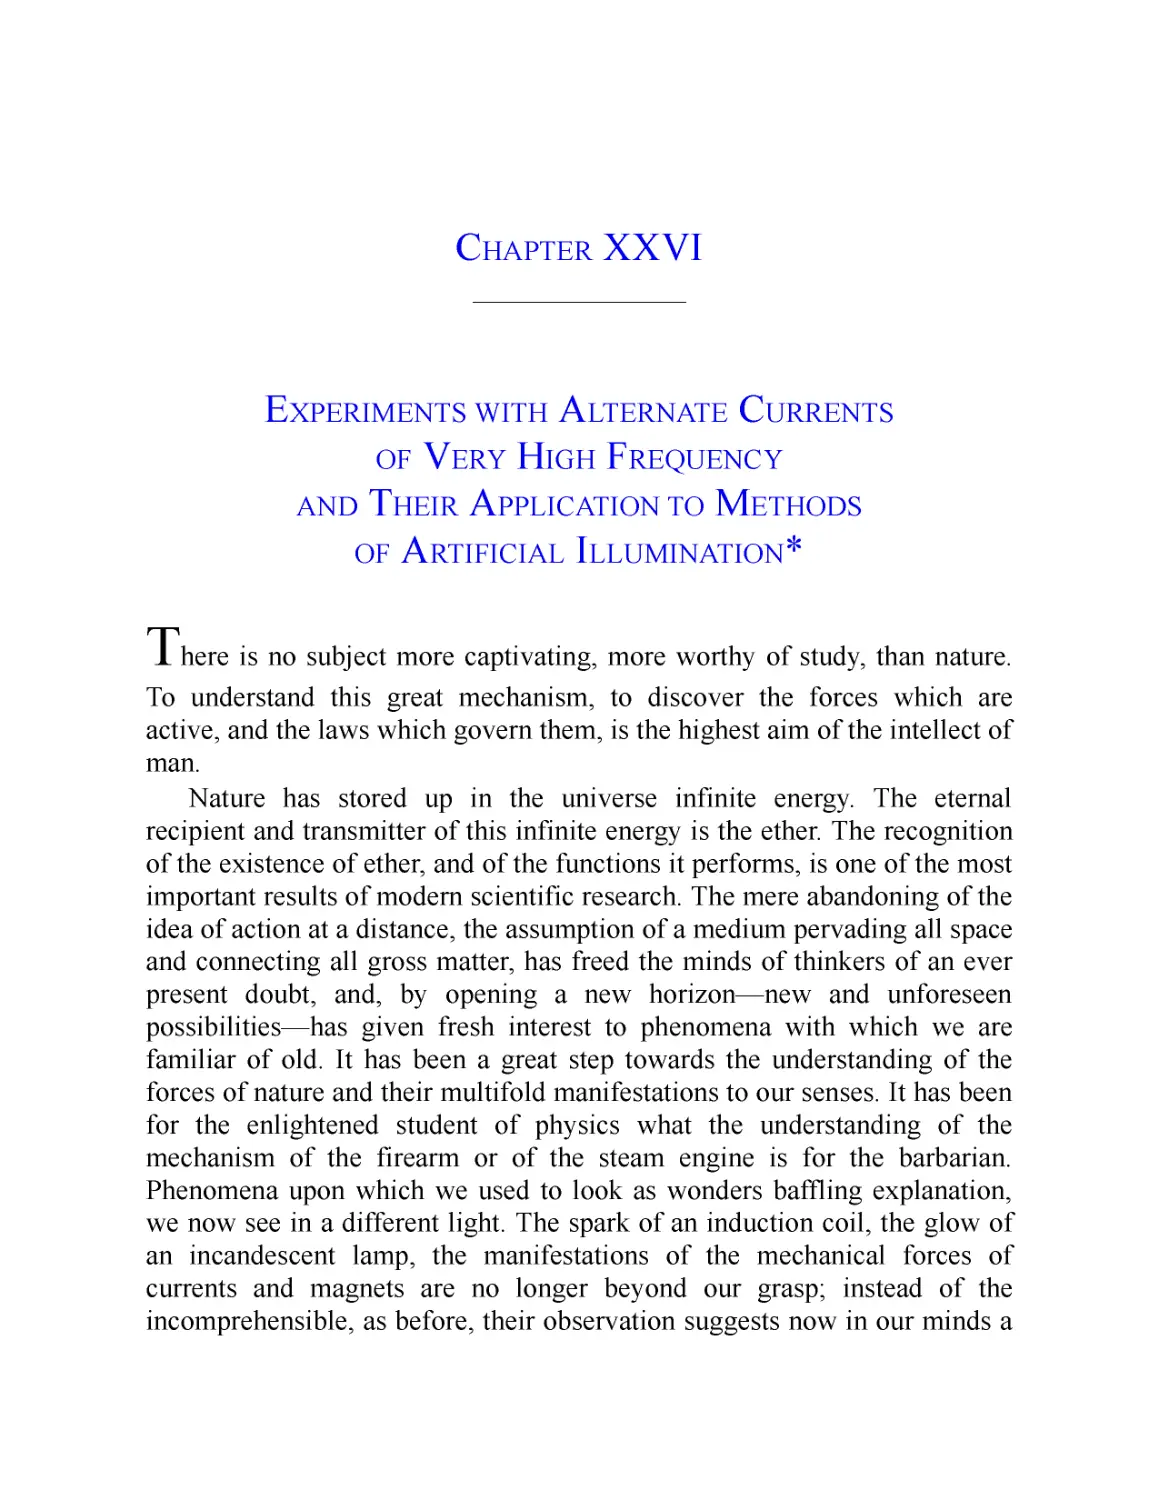 ﻿Chapter XXVI: Experiments with Alternate Currents of Very High Frequency and Their Application to Methods of Artificial Illuminatio